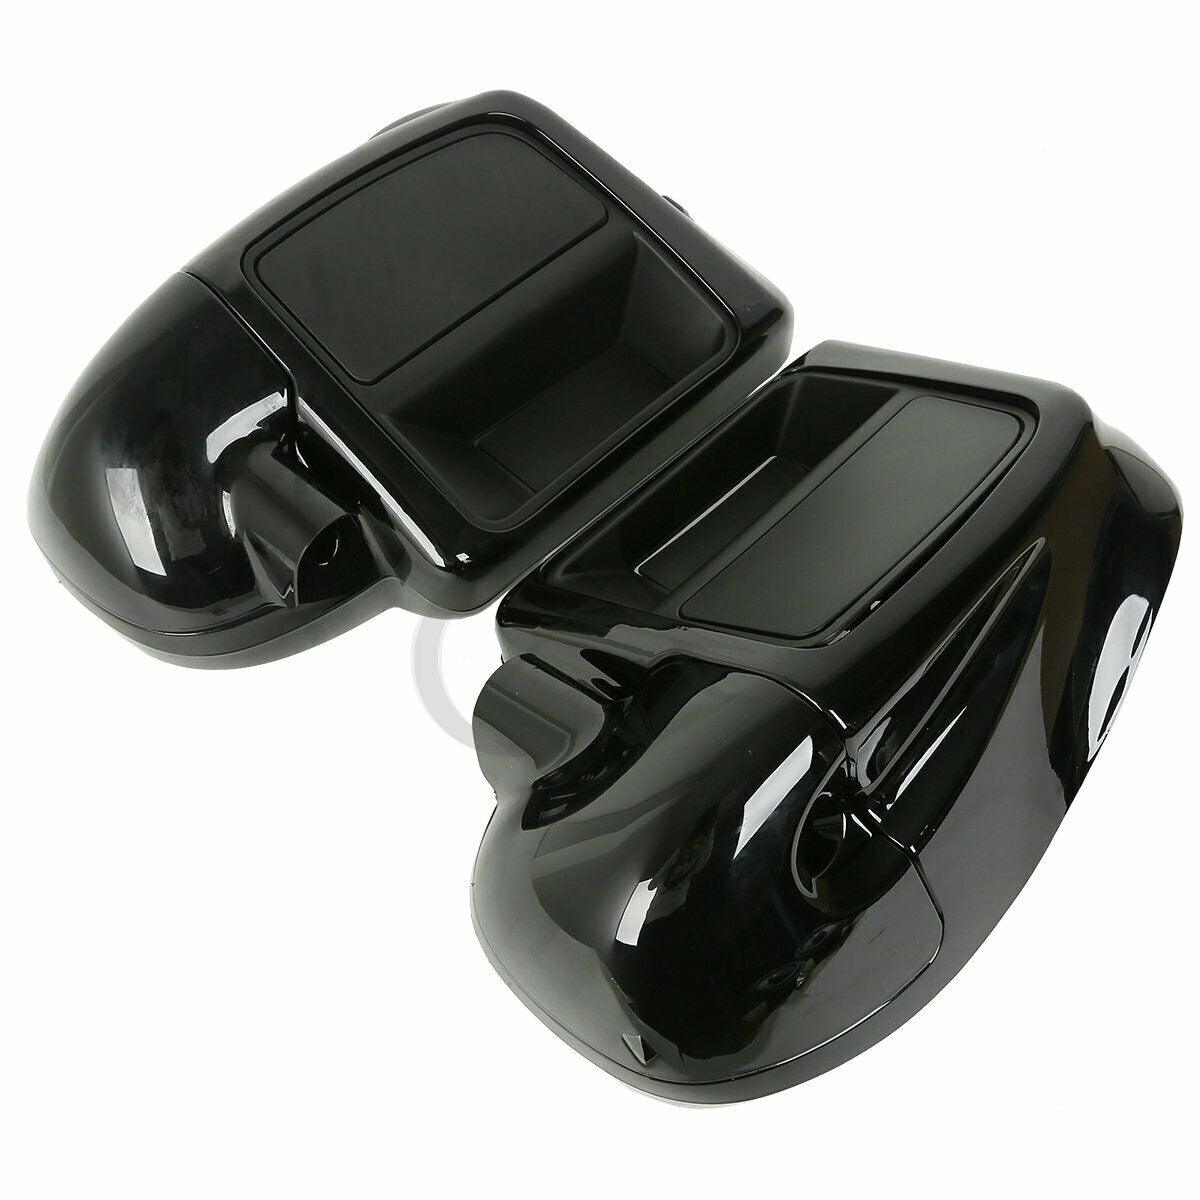 6.5" Speaker Pod+Lower Vented Fairing Fit For Harley Road Glide Special FLTRXS - Moto Life Products